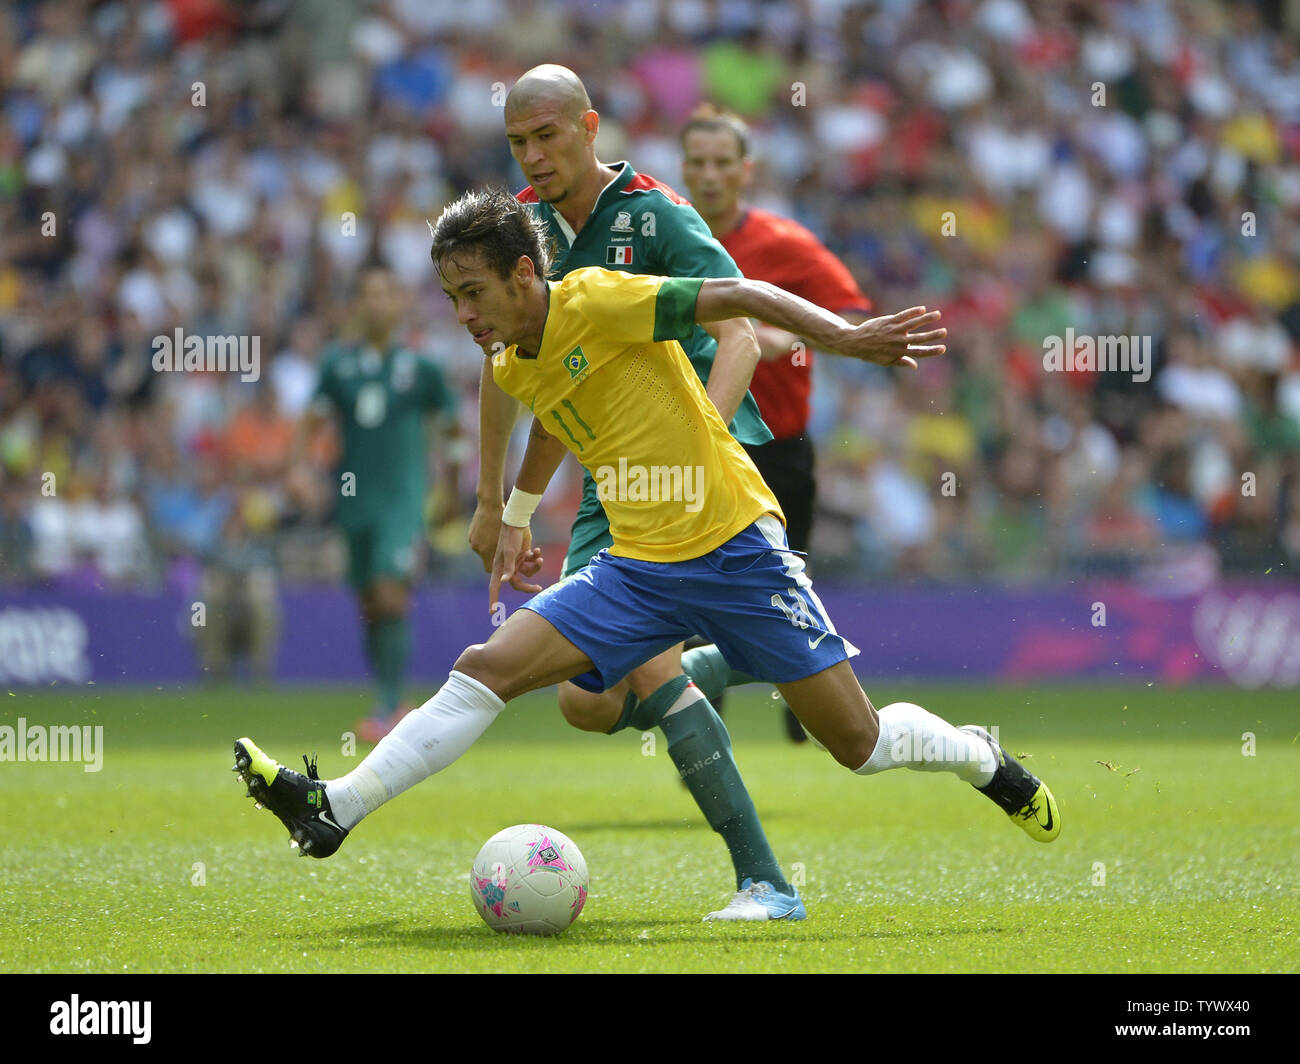 Forward Neymar of Brazil (L) moves the ball as midfielder Jorge Enriquez of Mexico defends during the second half of the Gold Medal Football Match at the London 2012 Summer Olympics on August 11, 2012 at Wembley Stadium, London. Mexico defeated Brazil 2-1 to win the Gold Medal.      UPI/Brian Kersey Stock Photo